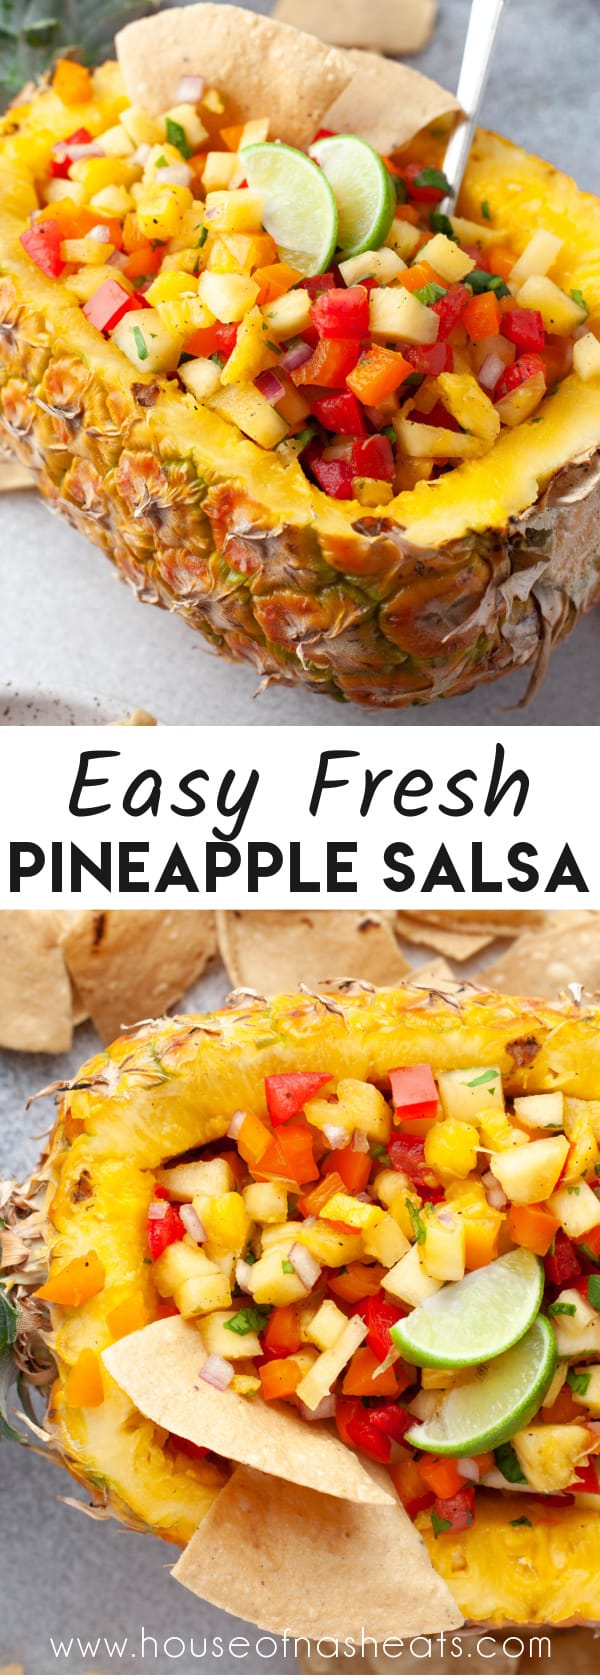 A collage of images of fresh pineapple salsa with text overlay.